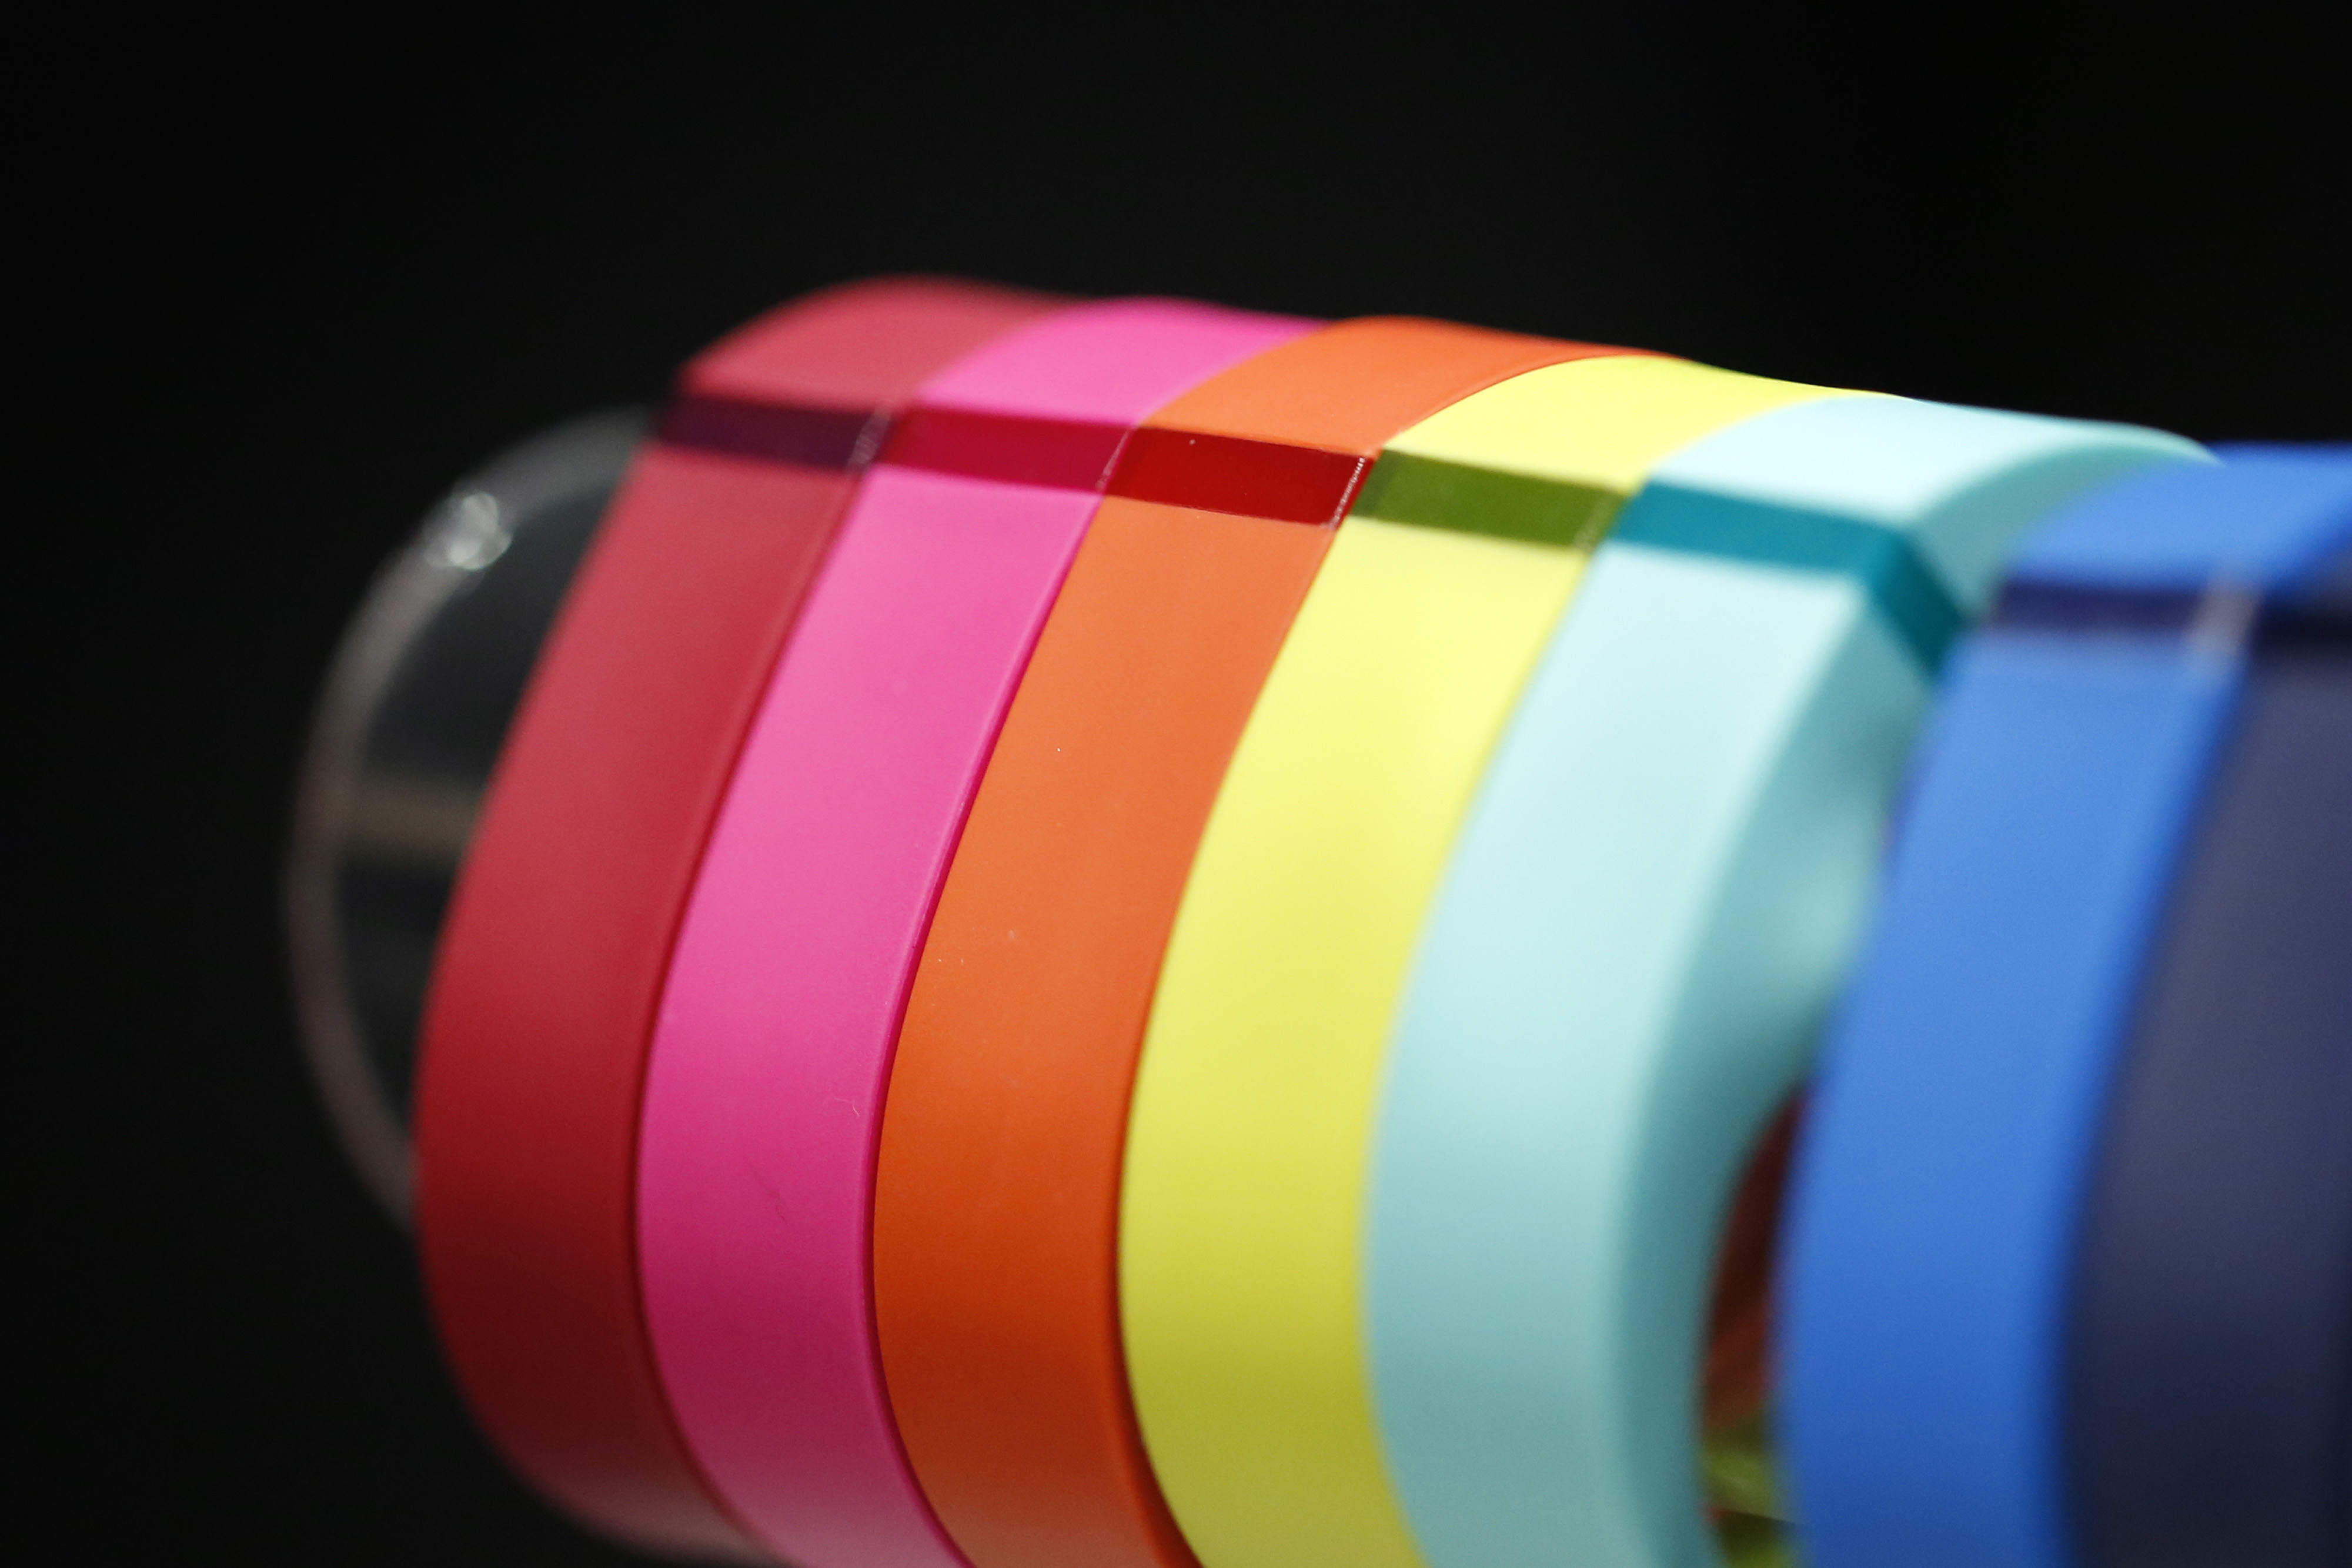 Latest Products At The Wearable Device Technology Expo